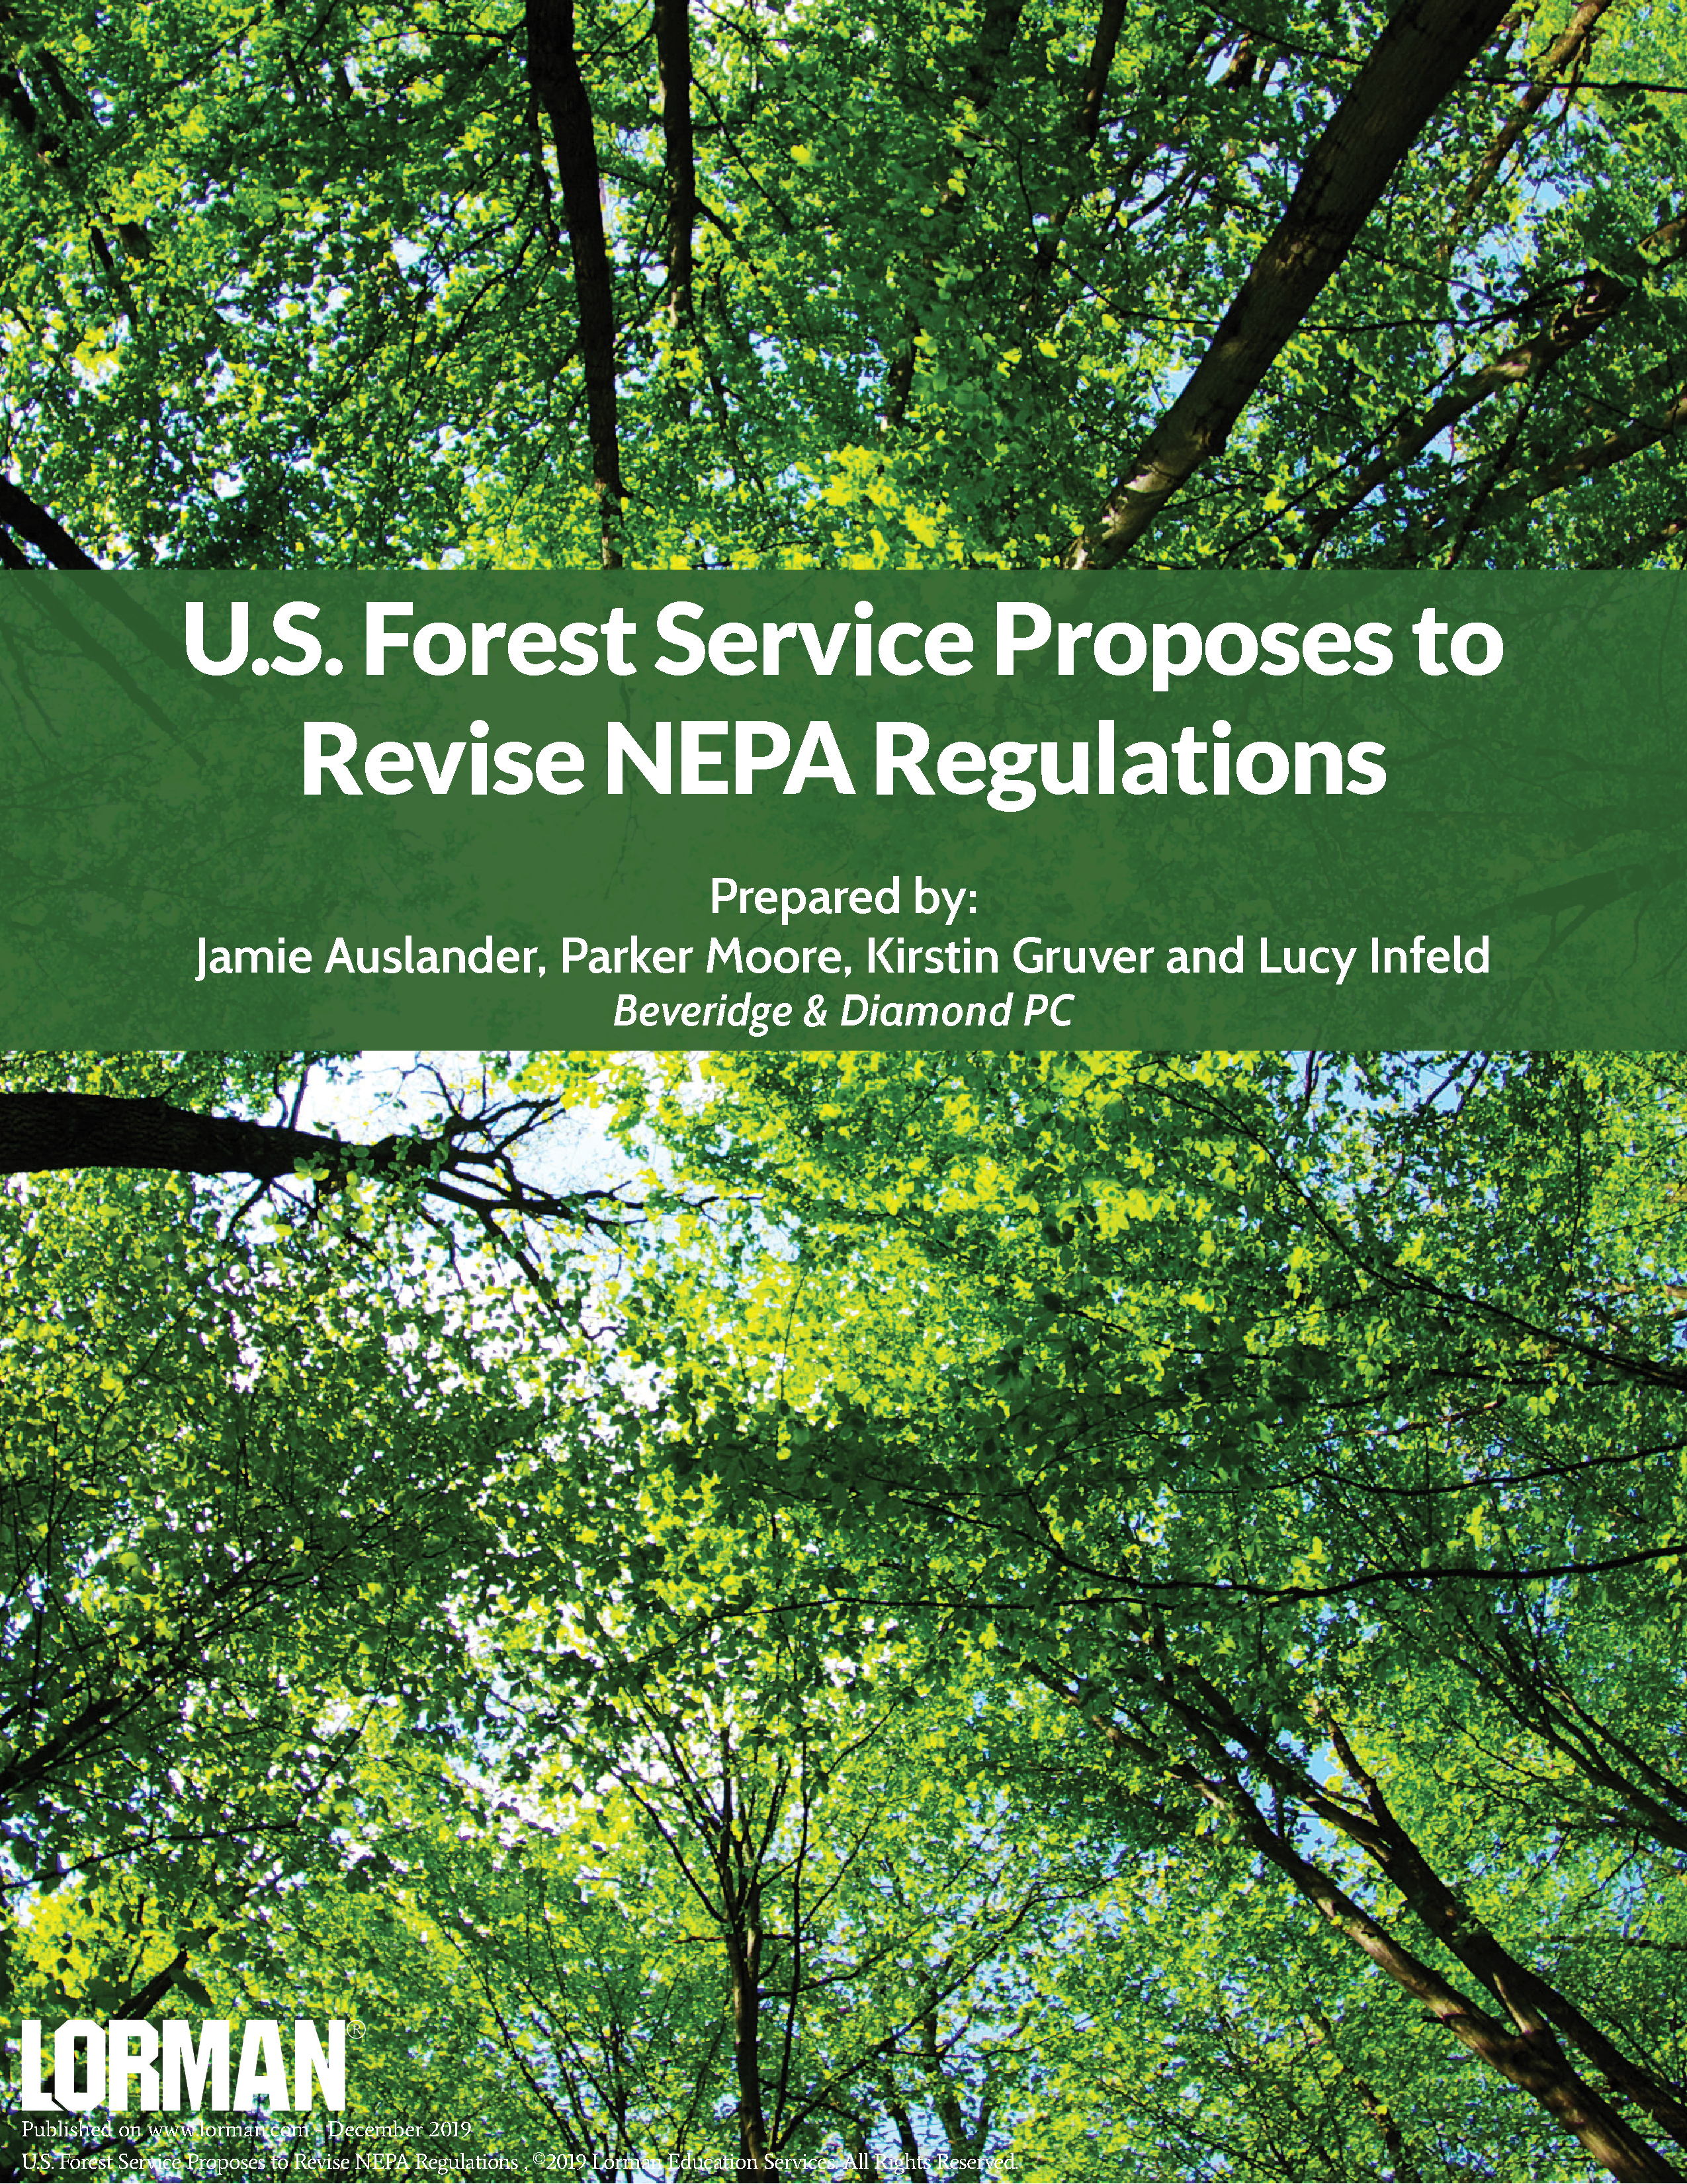 U.S. Forest Service Proposes to Revise NEPA Regulations